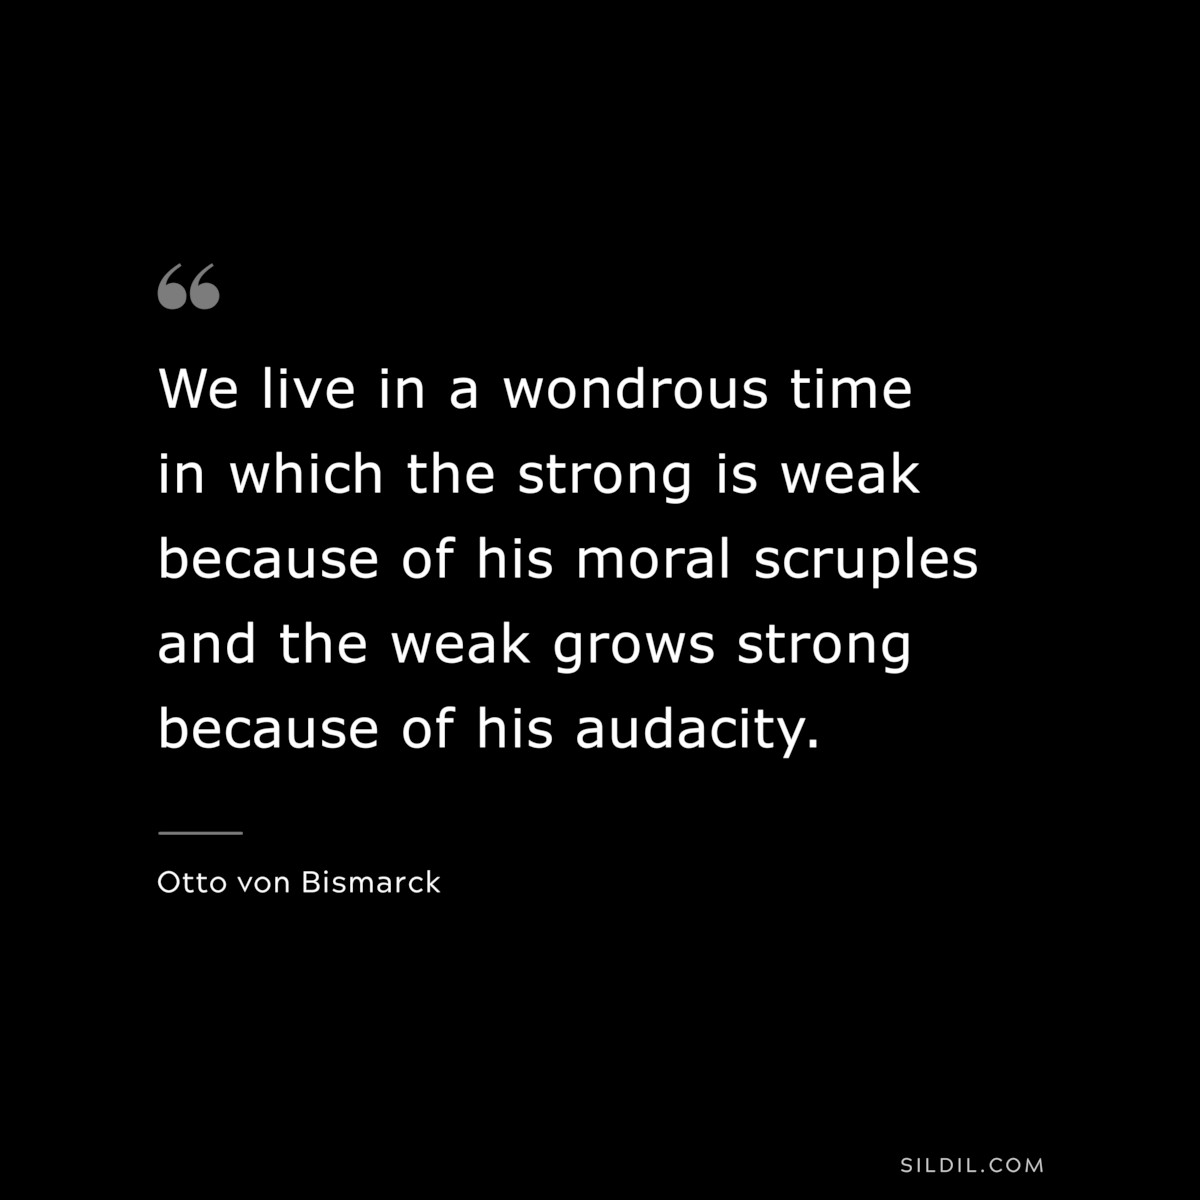 We live in a wondrous time in which the strong is weak because of his moral scruples and the weak grows strong because of his audacity. ― Otto von Bismarck